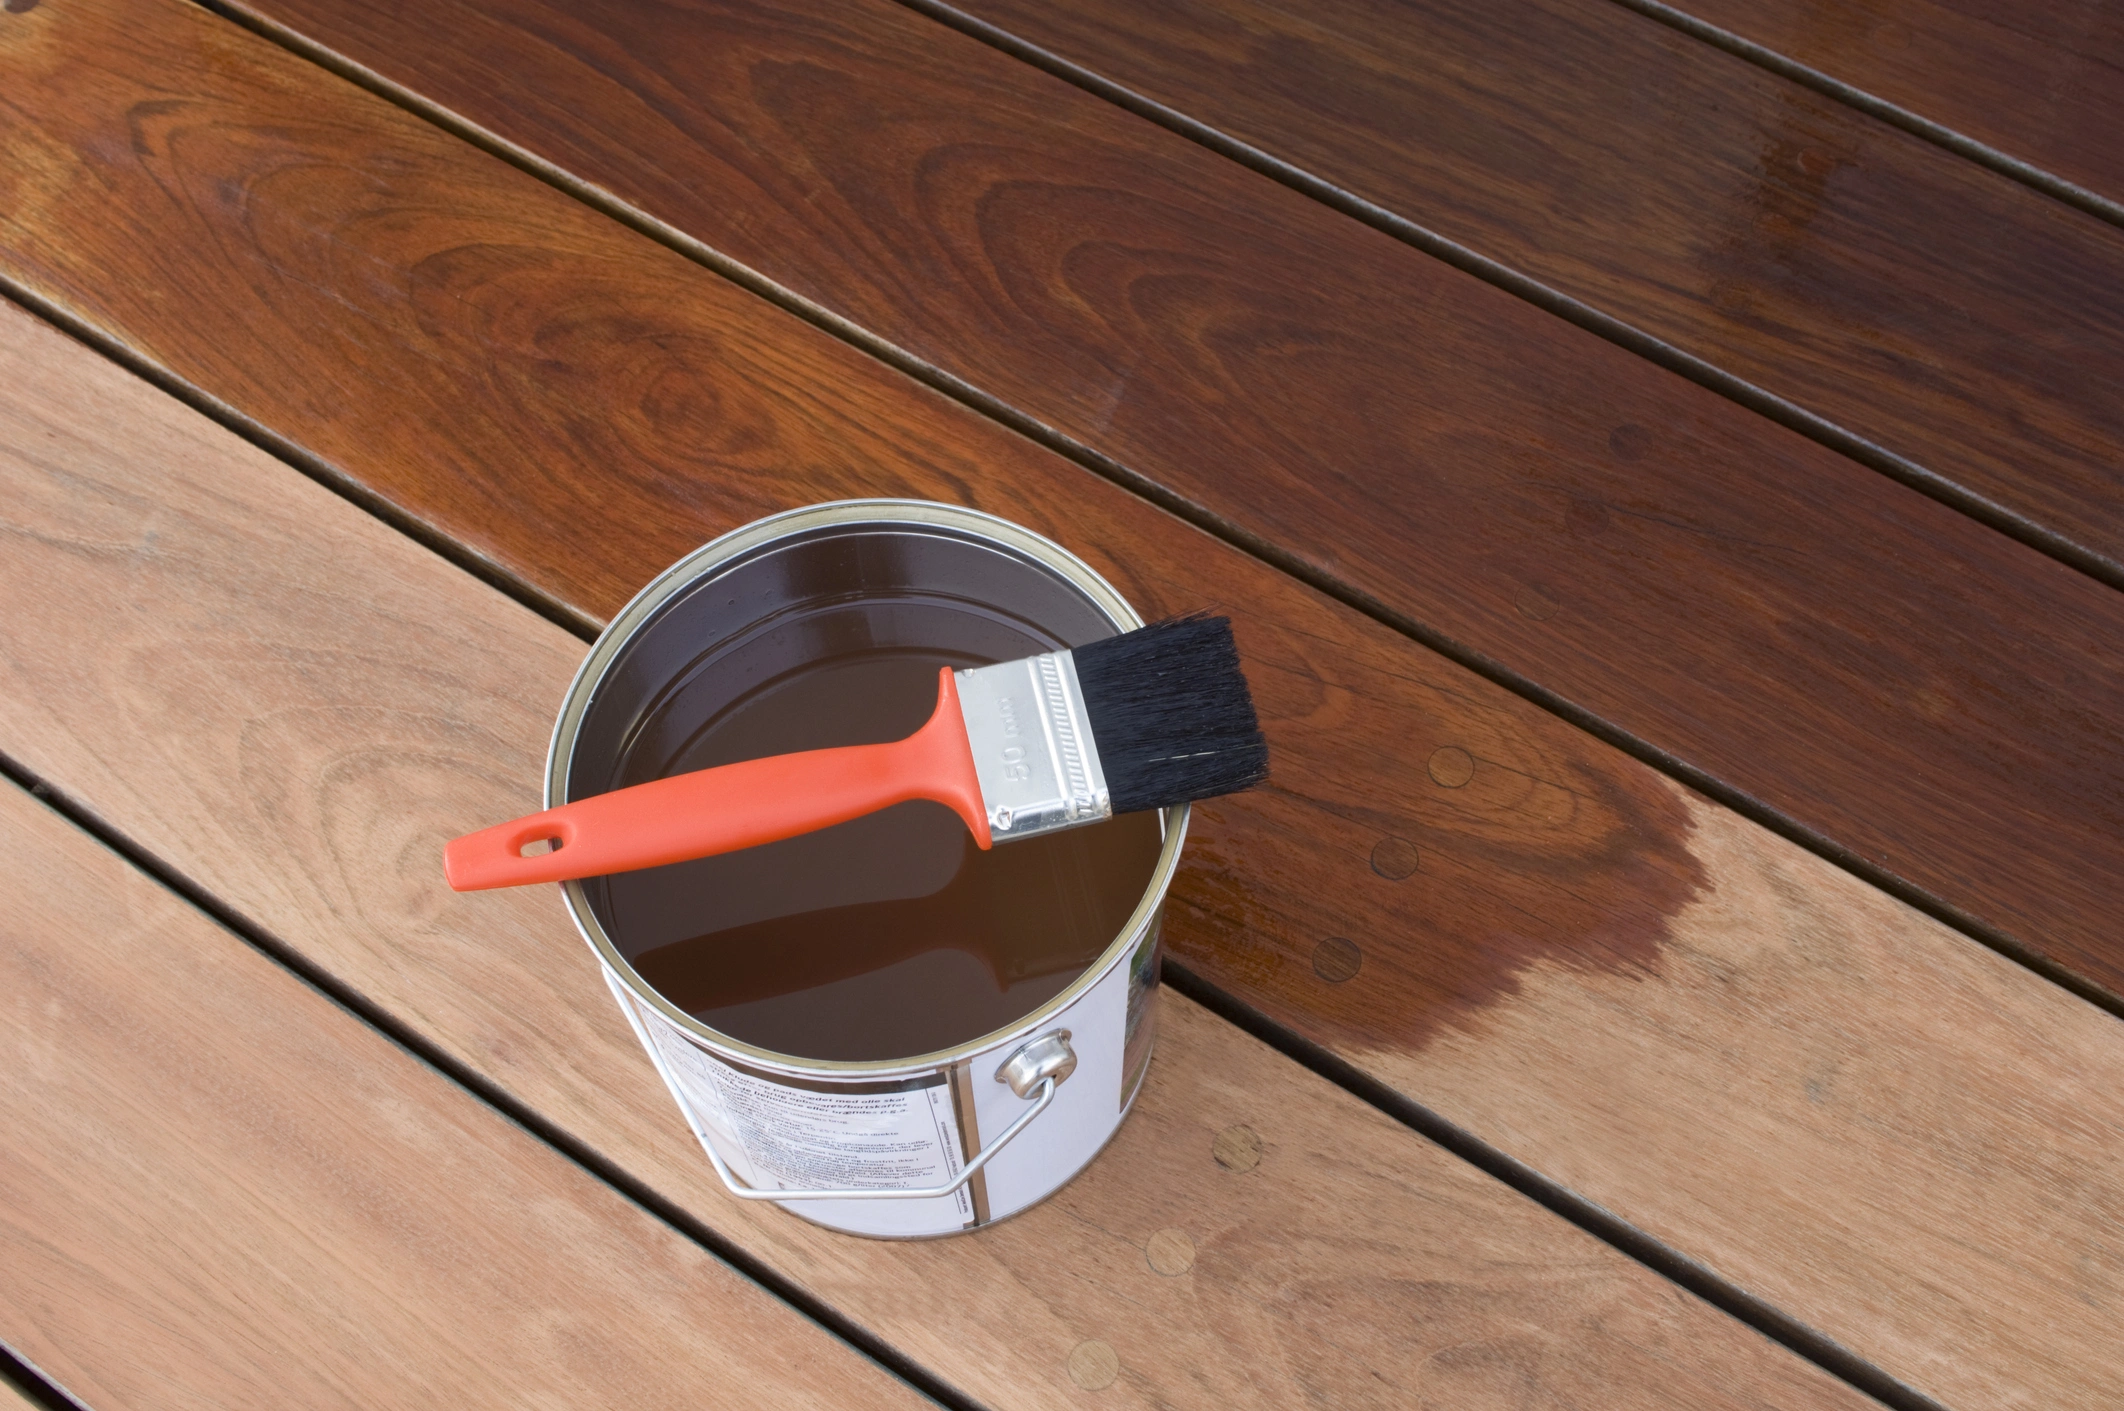 Vanish being used to paint over the timber wooden deck to maintain it's colour, and also make it more shiny and colourful. 